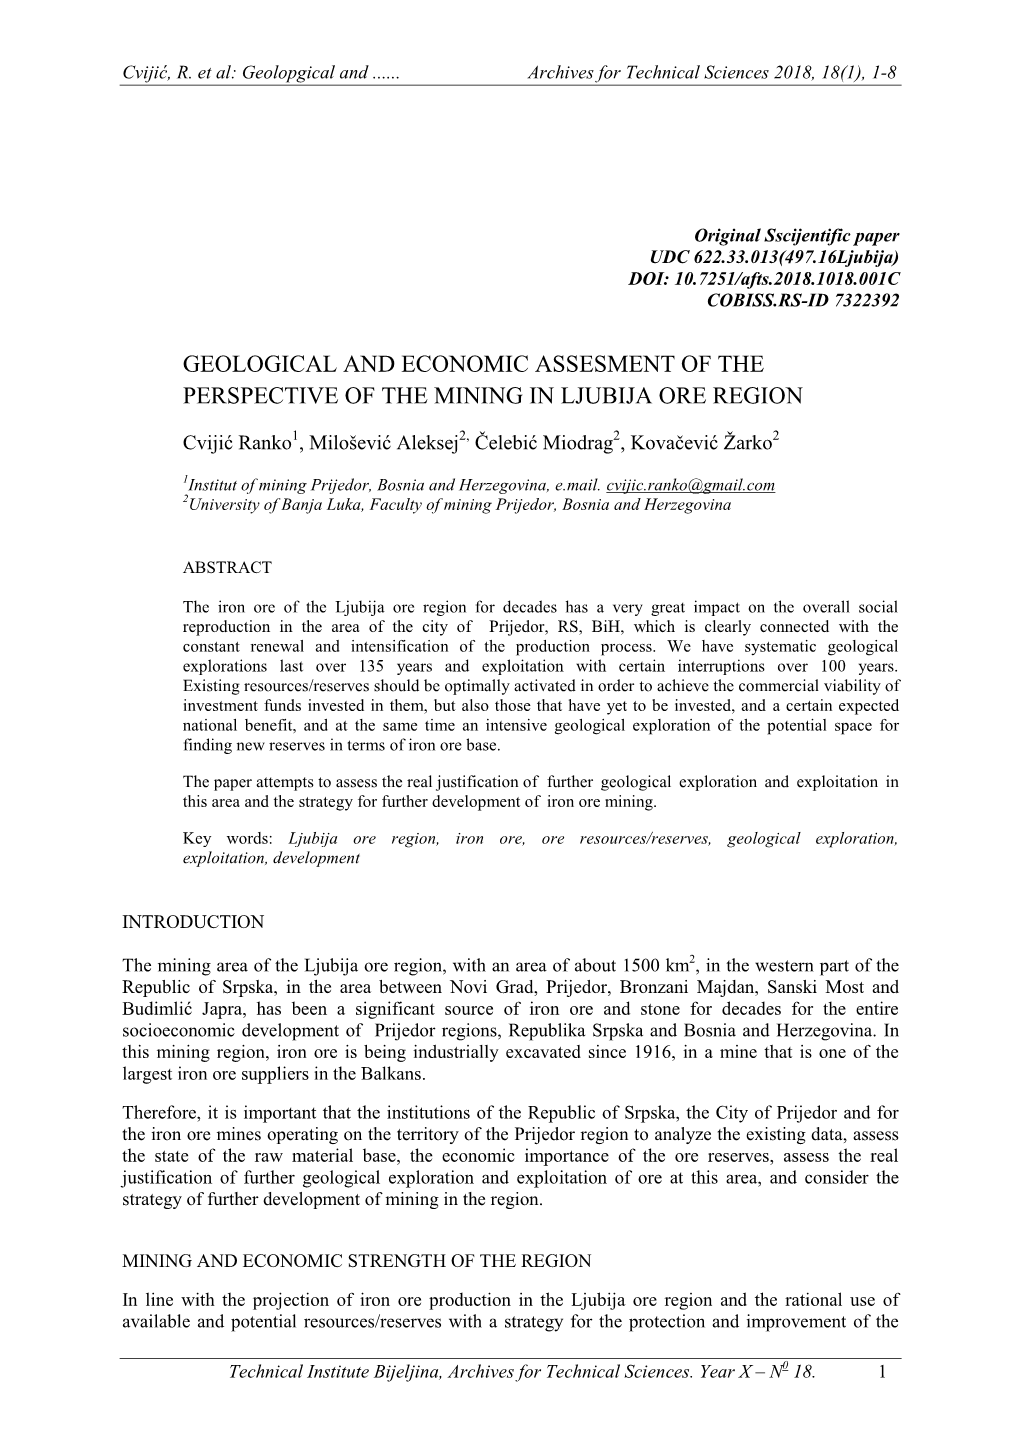 Geological and Economic Assesment of the Perspective of the Mining in Ljubija Ore Region